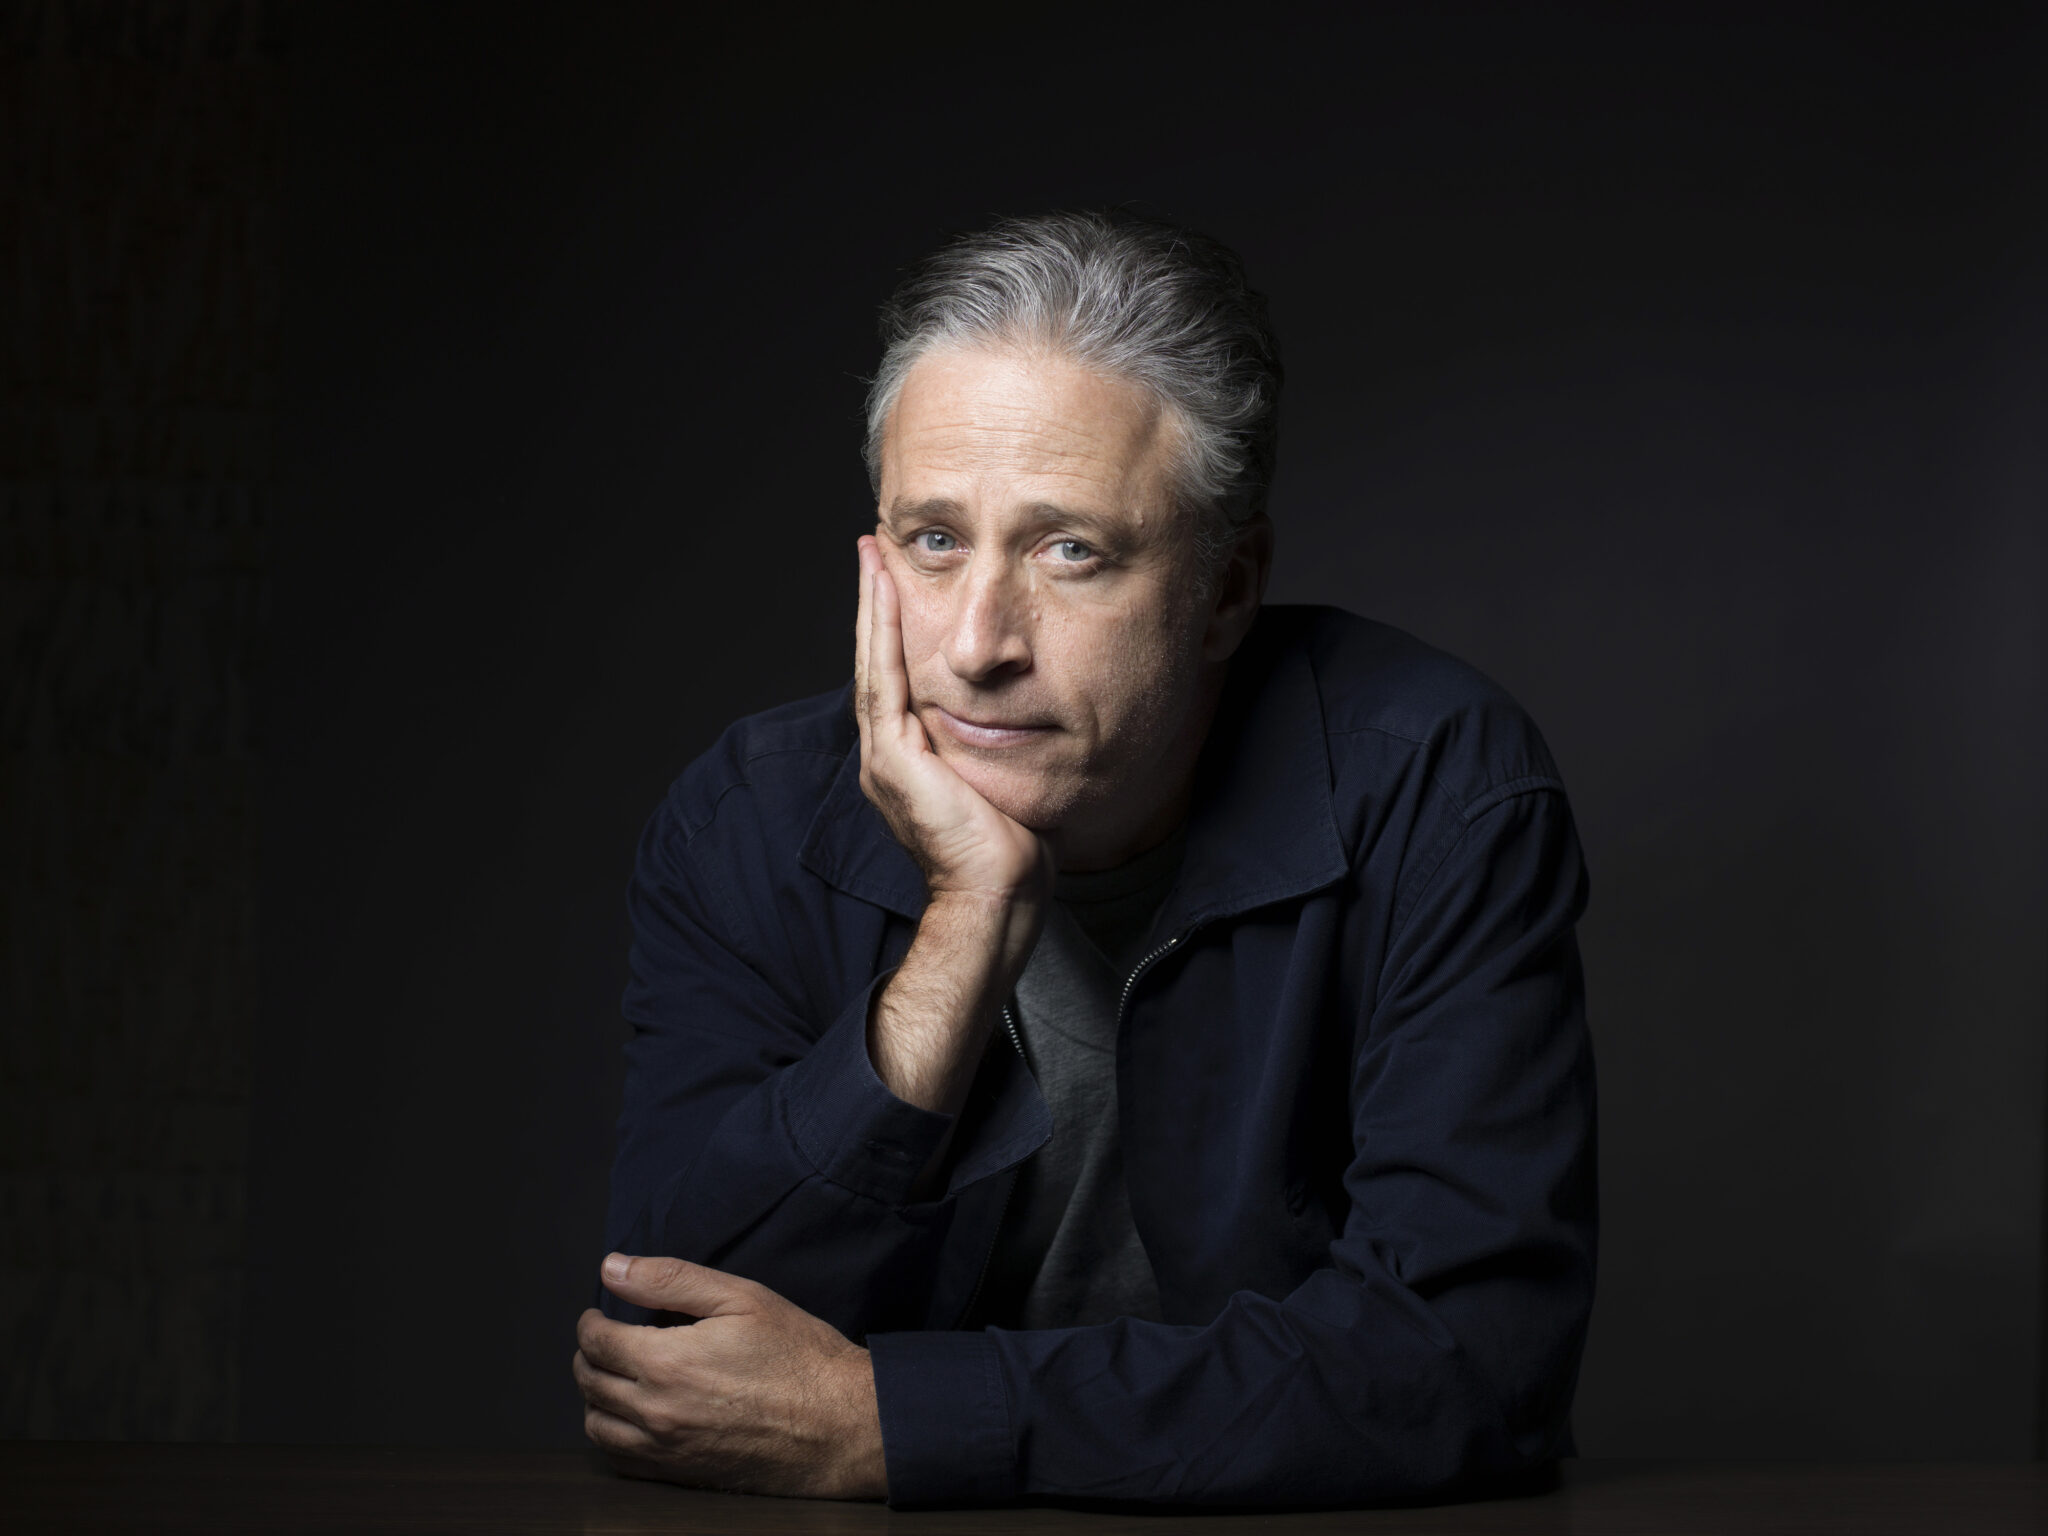 NY Post Promotes Laughably Wrong Claim From Online Troll Accusing Jon Stewart of Fraudulently Overvaluing His Apartment (mediaite.com)